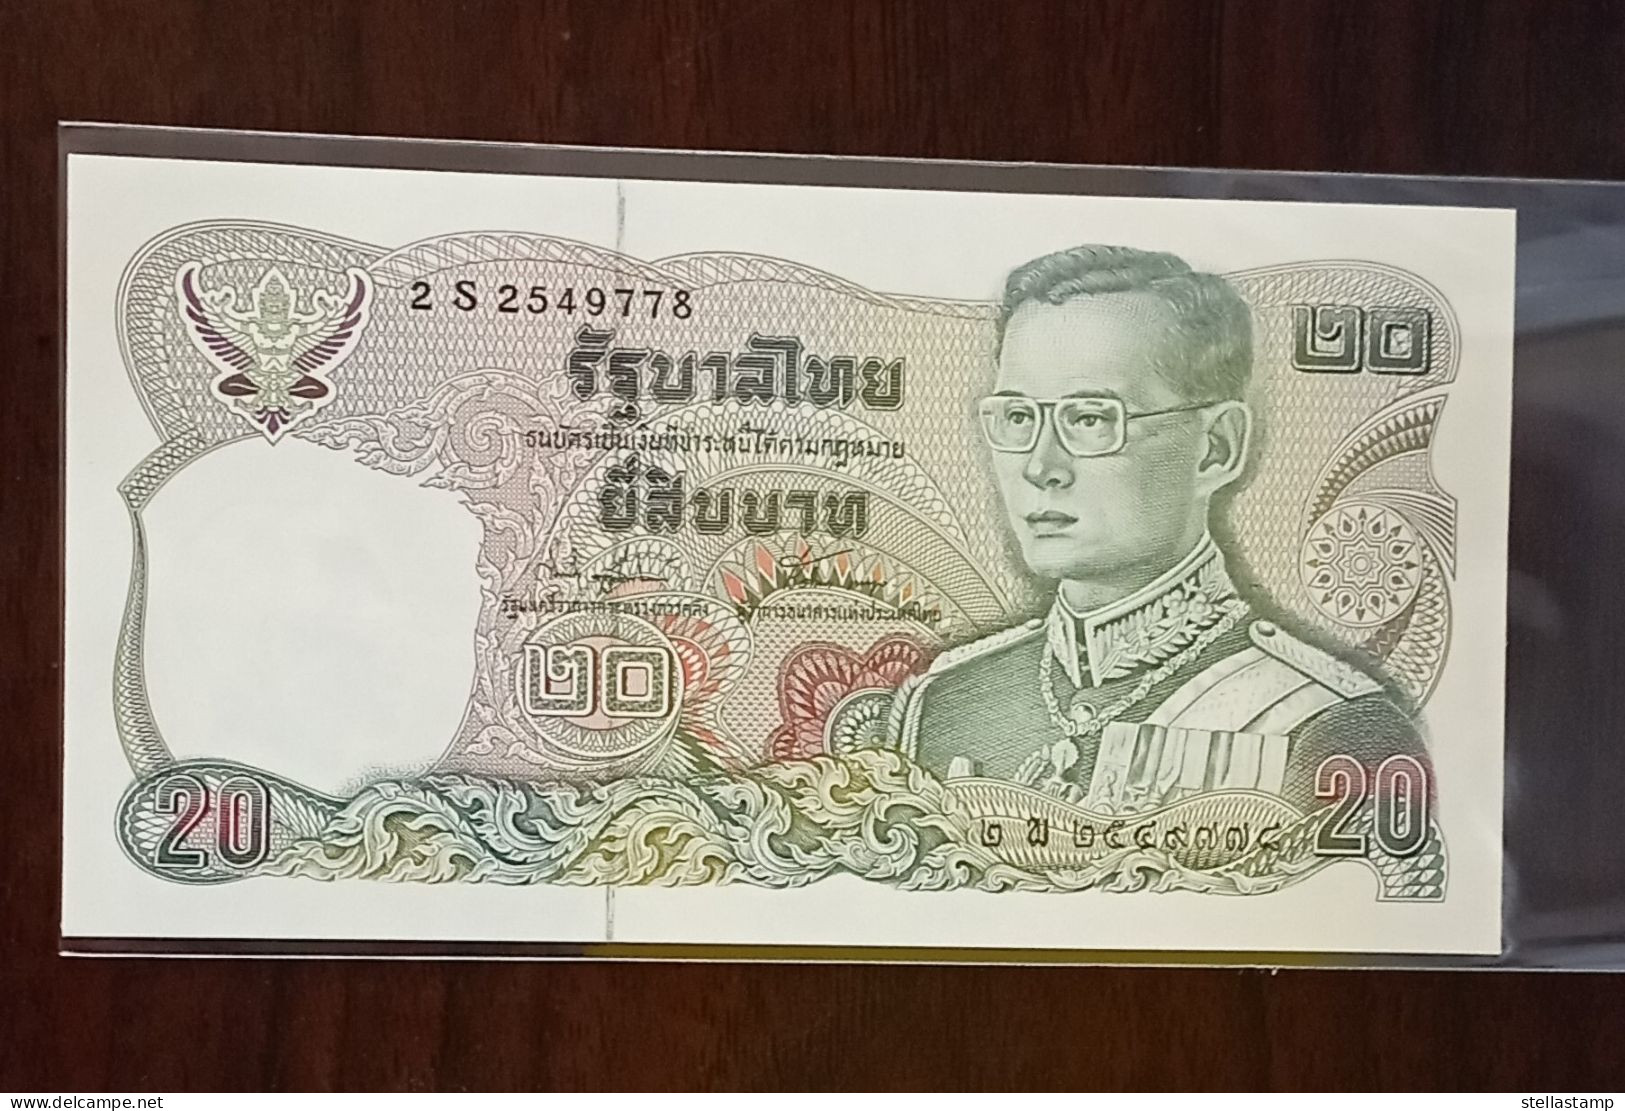 Thailand Banknote 20 Baht Series 12 P#88 SIGN#74 - 2S Replacement - Thailand